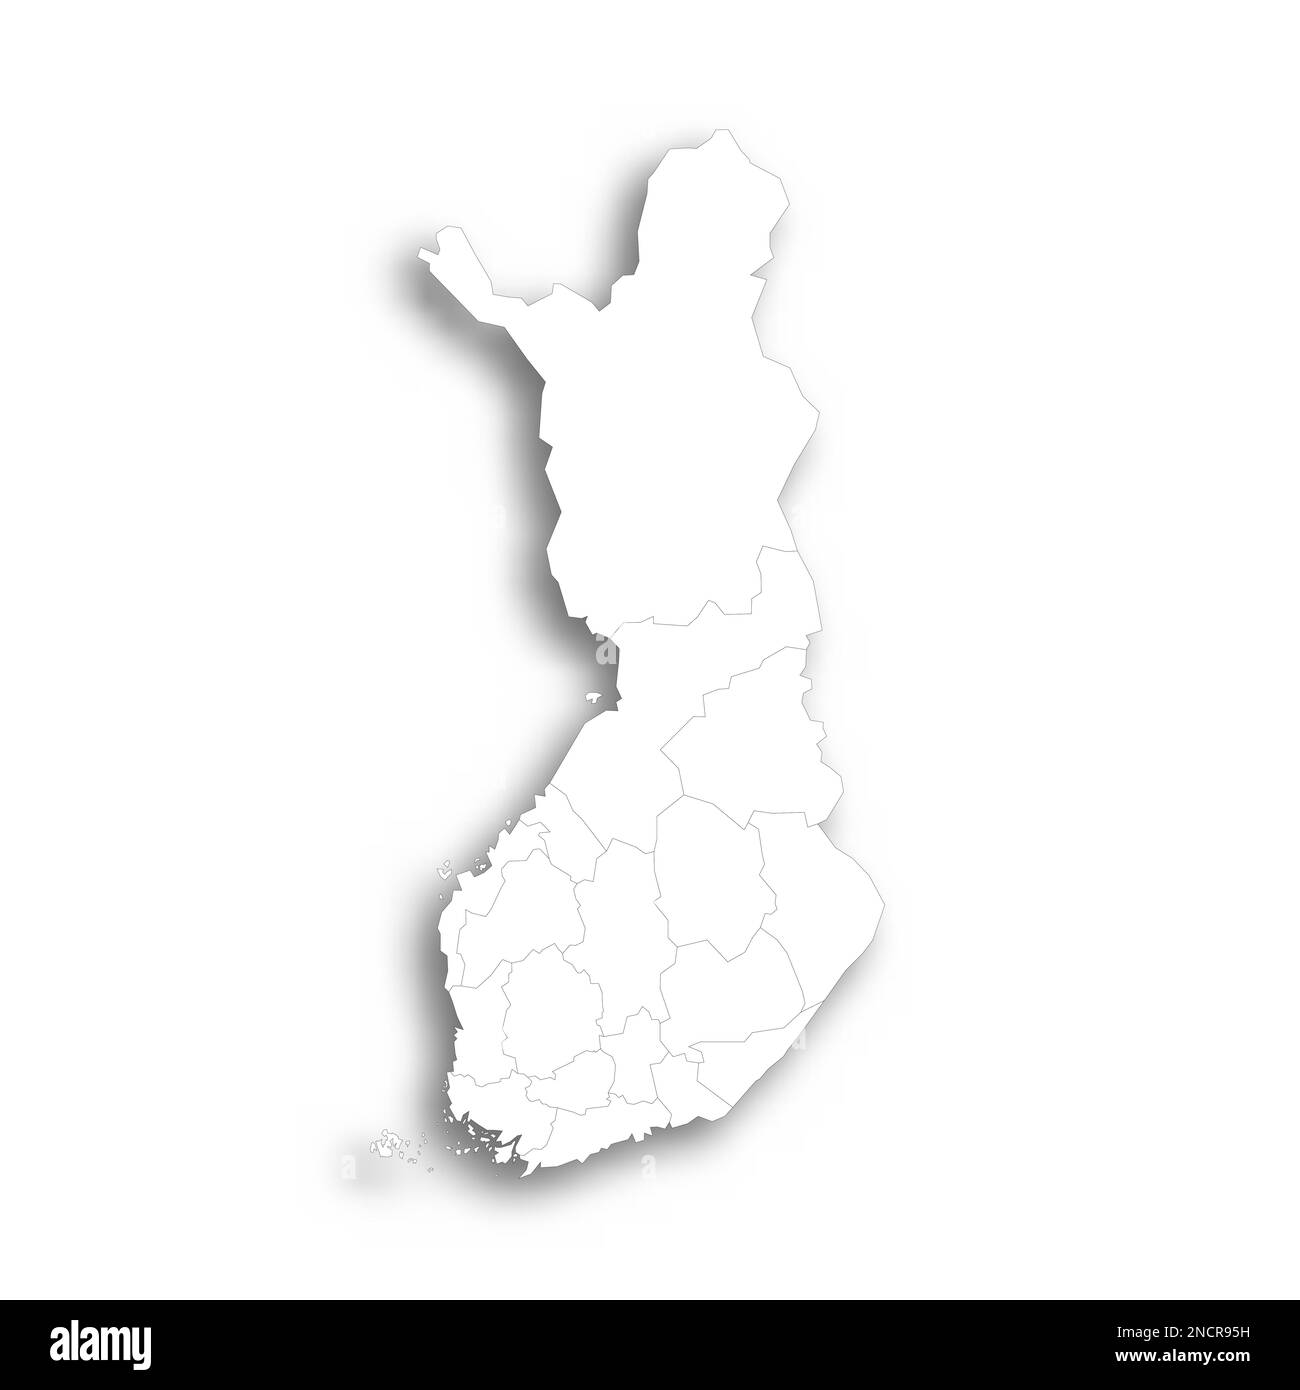 Finland political map of administrative divisions - regions and one autonomous region of Aland. Flat white blank map with thin black outline and dropped shadow. Stock Vector